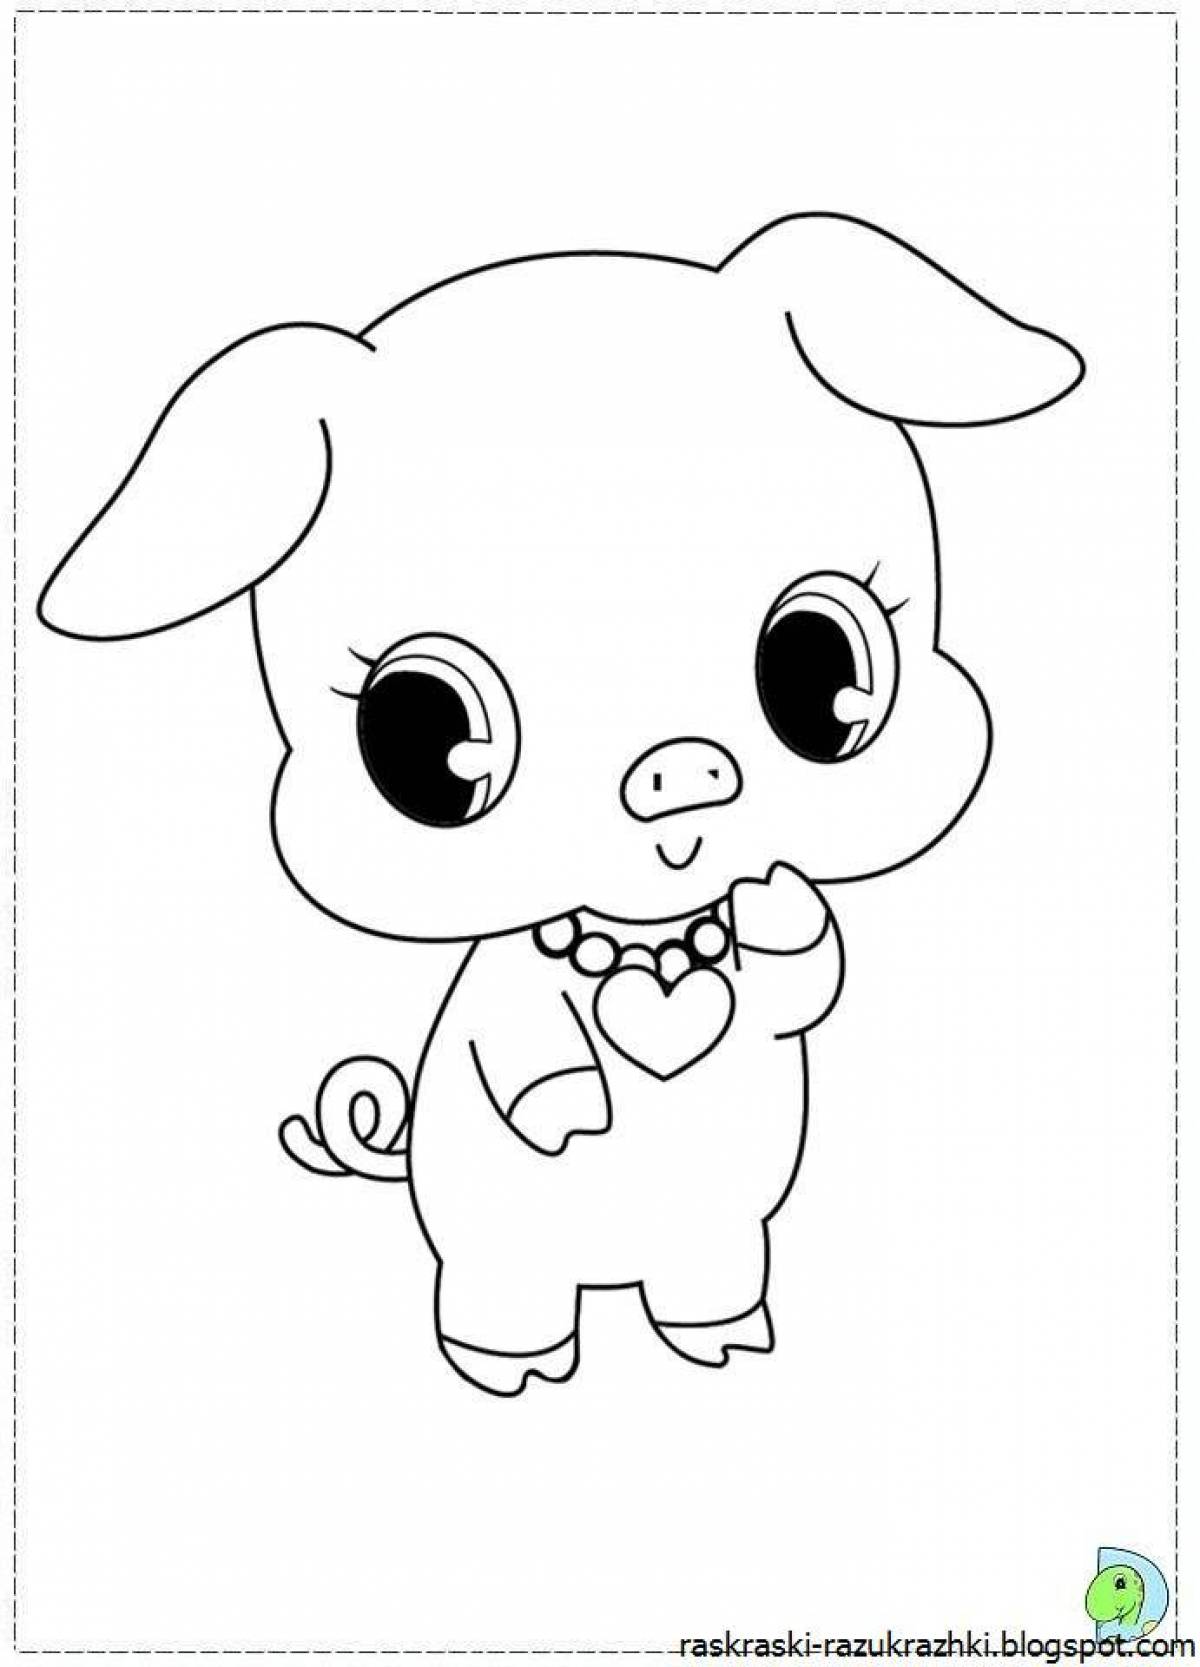 Cute-like-coloring button cute animals